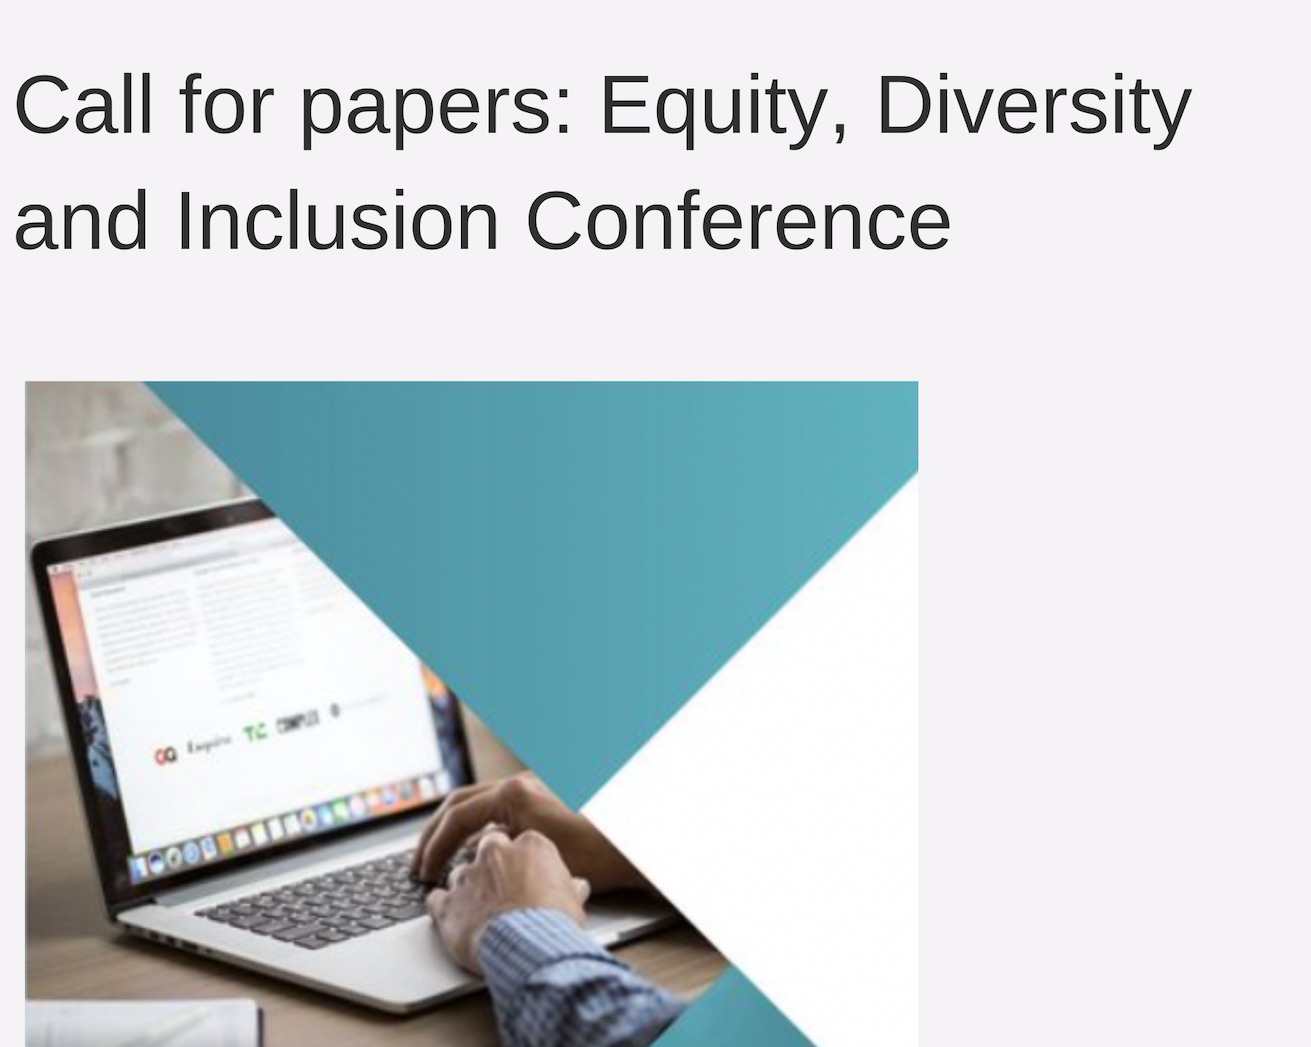 Call for Papers: Conference on Equity, Diversity and Inclusion (deadline Feb. 25th, 2022)